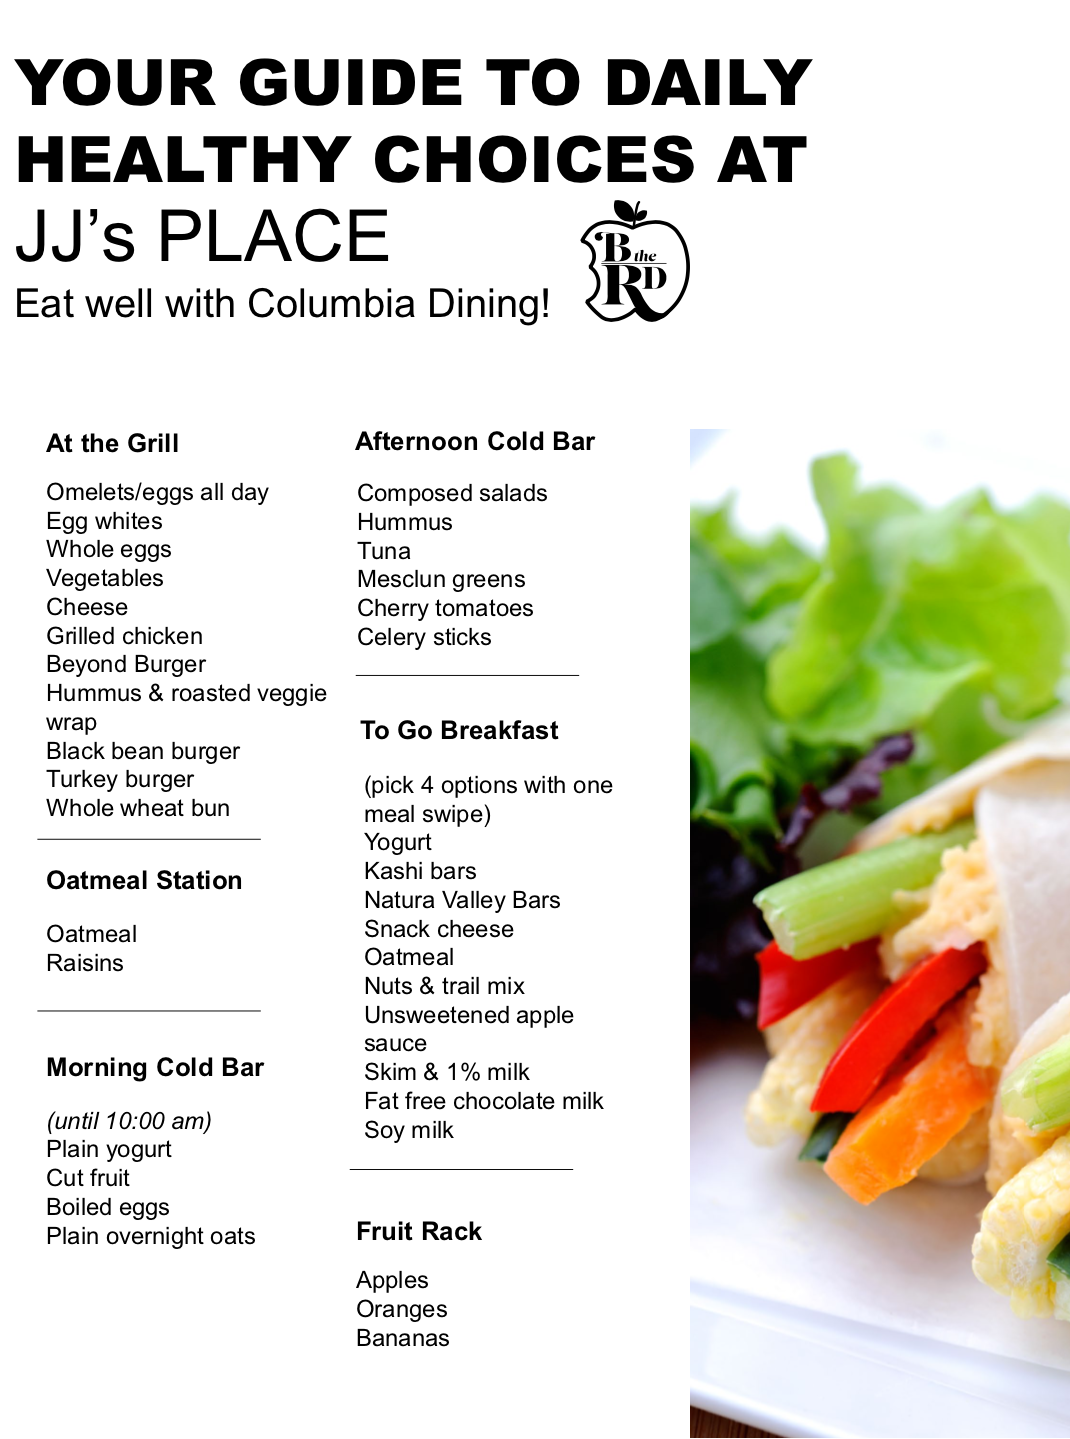 Eat Well at JJ's Place